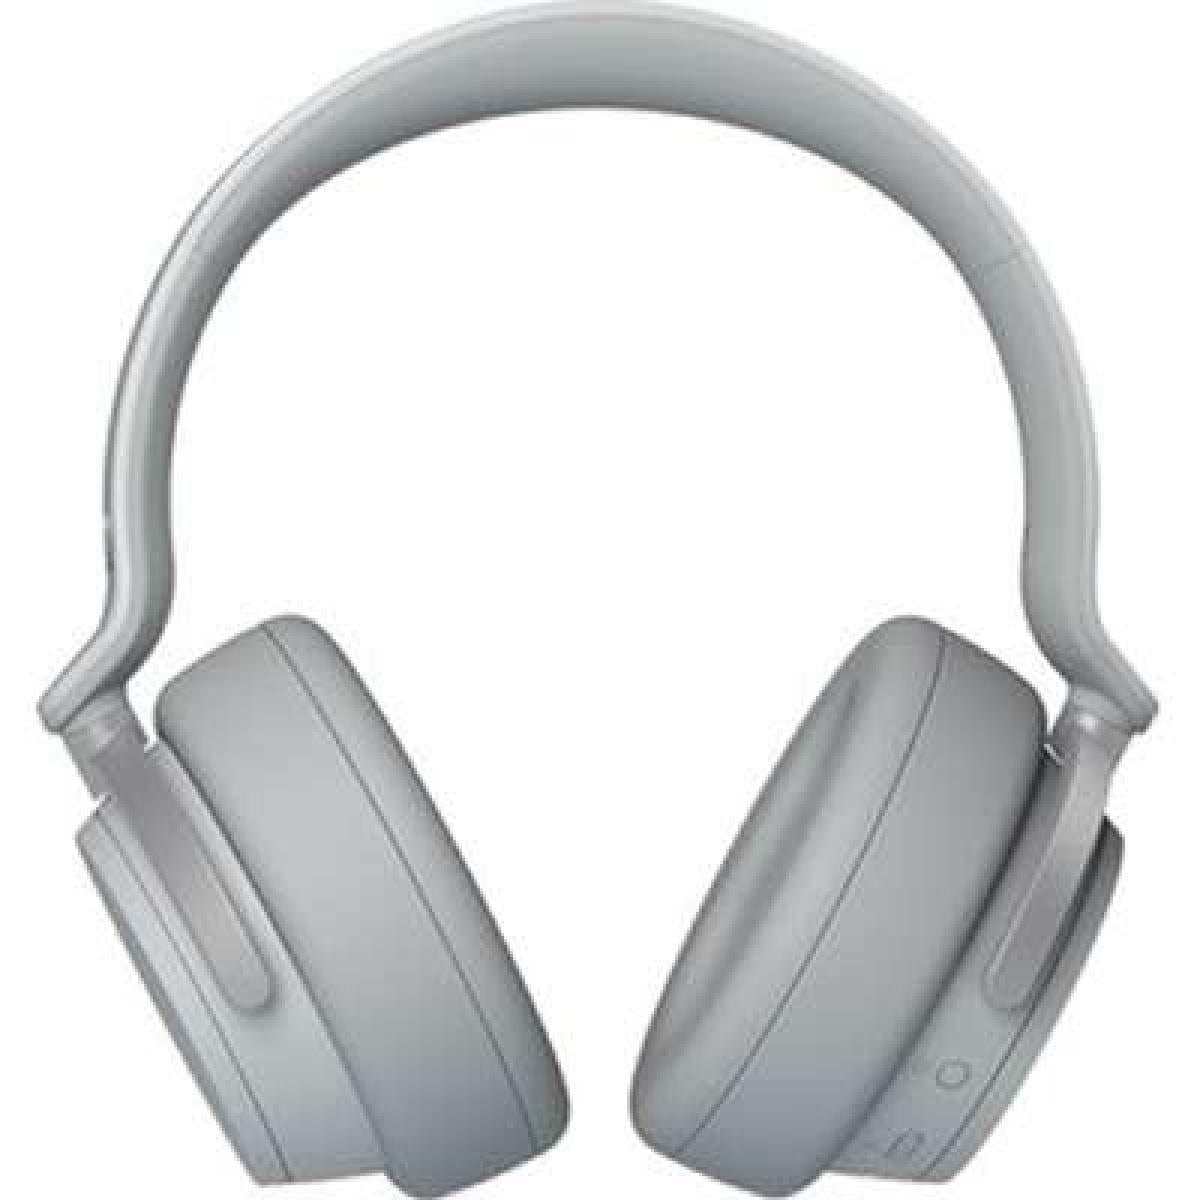 Microsoft Surface surface MICROSOFT SURFACE HEADPHONE - WIRELESS NOISE CANCELLING